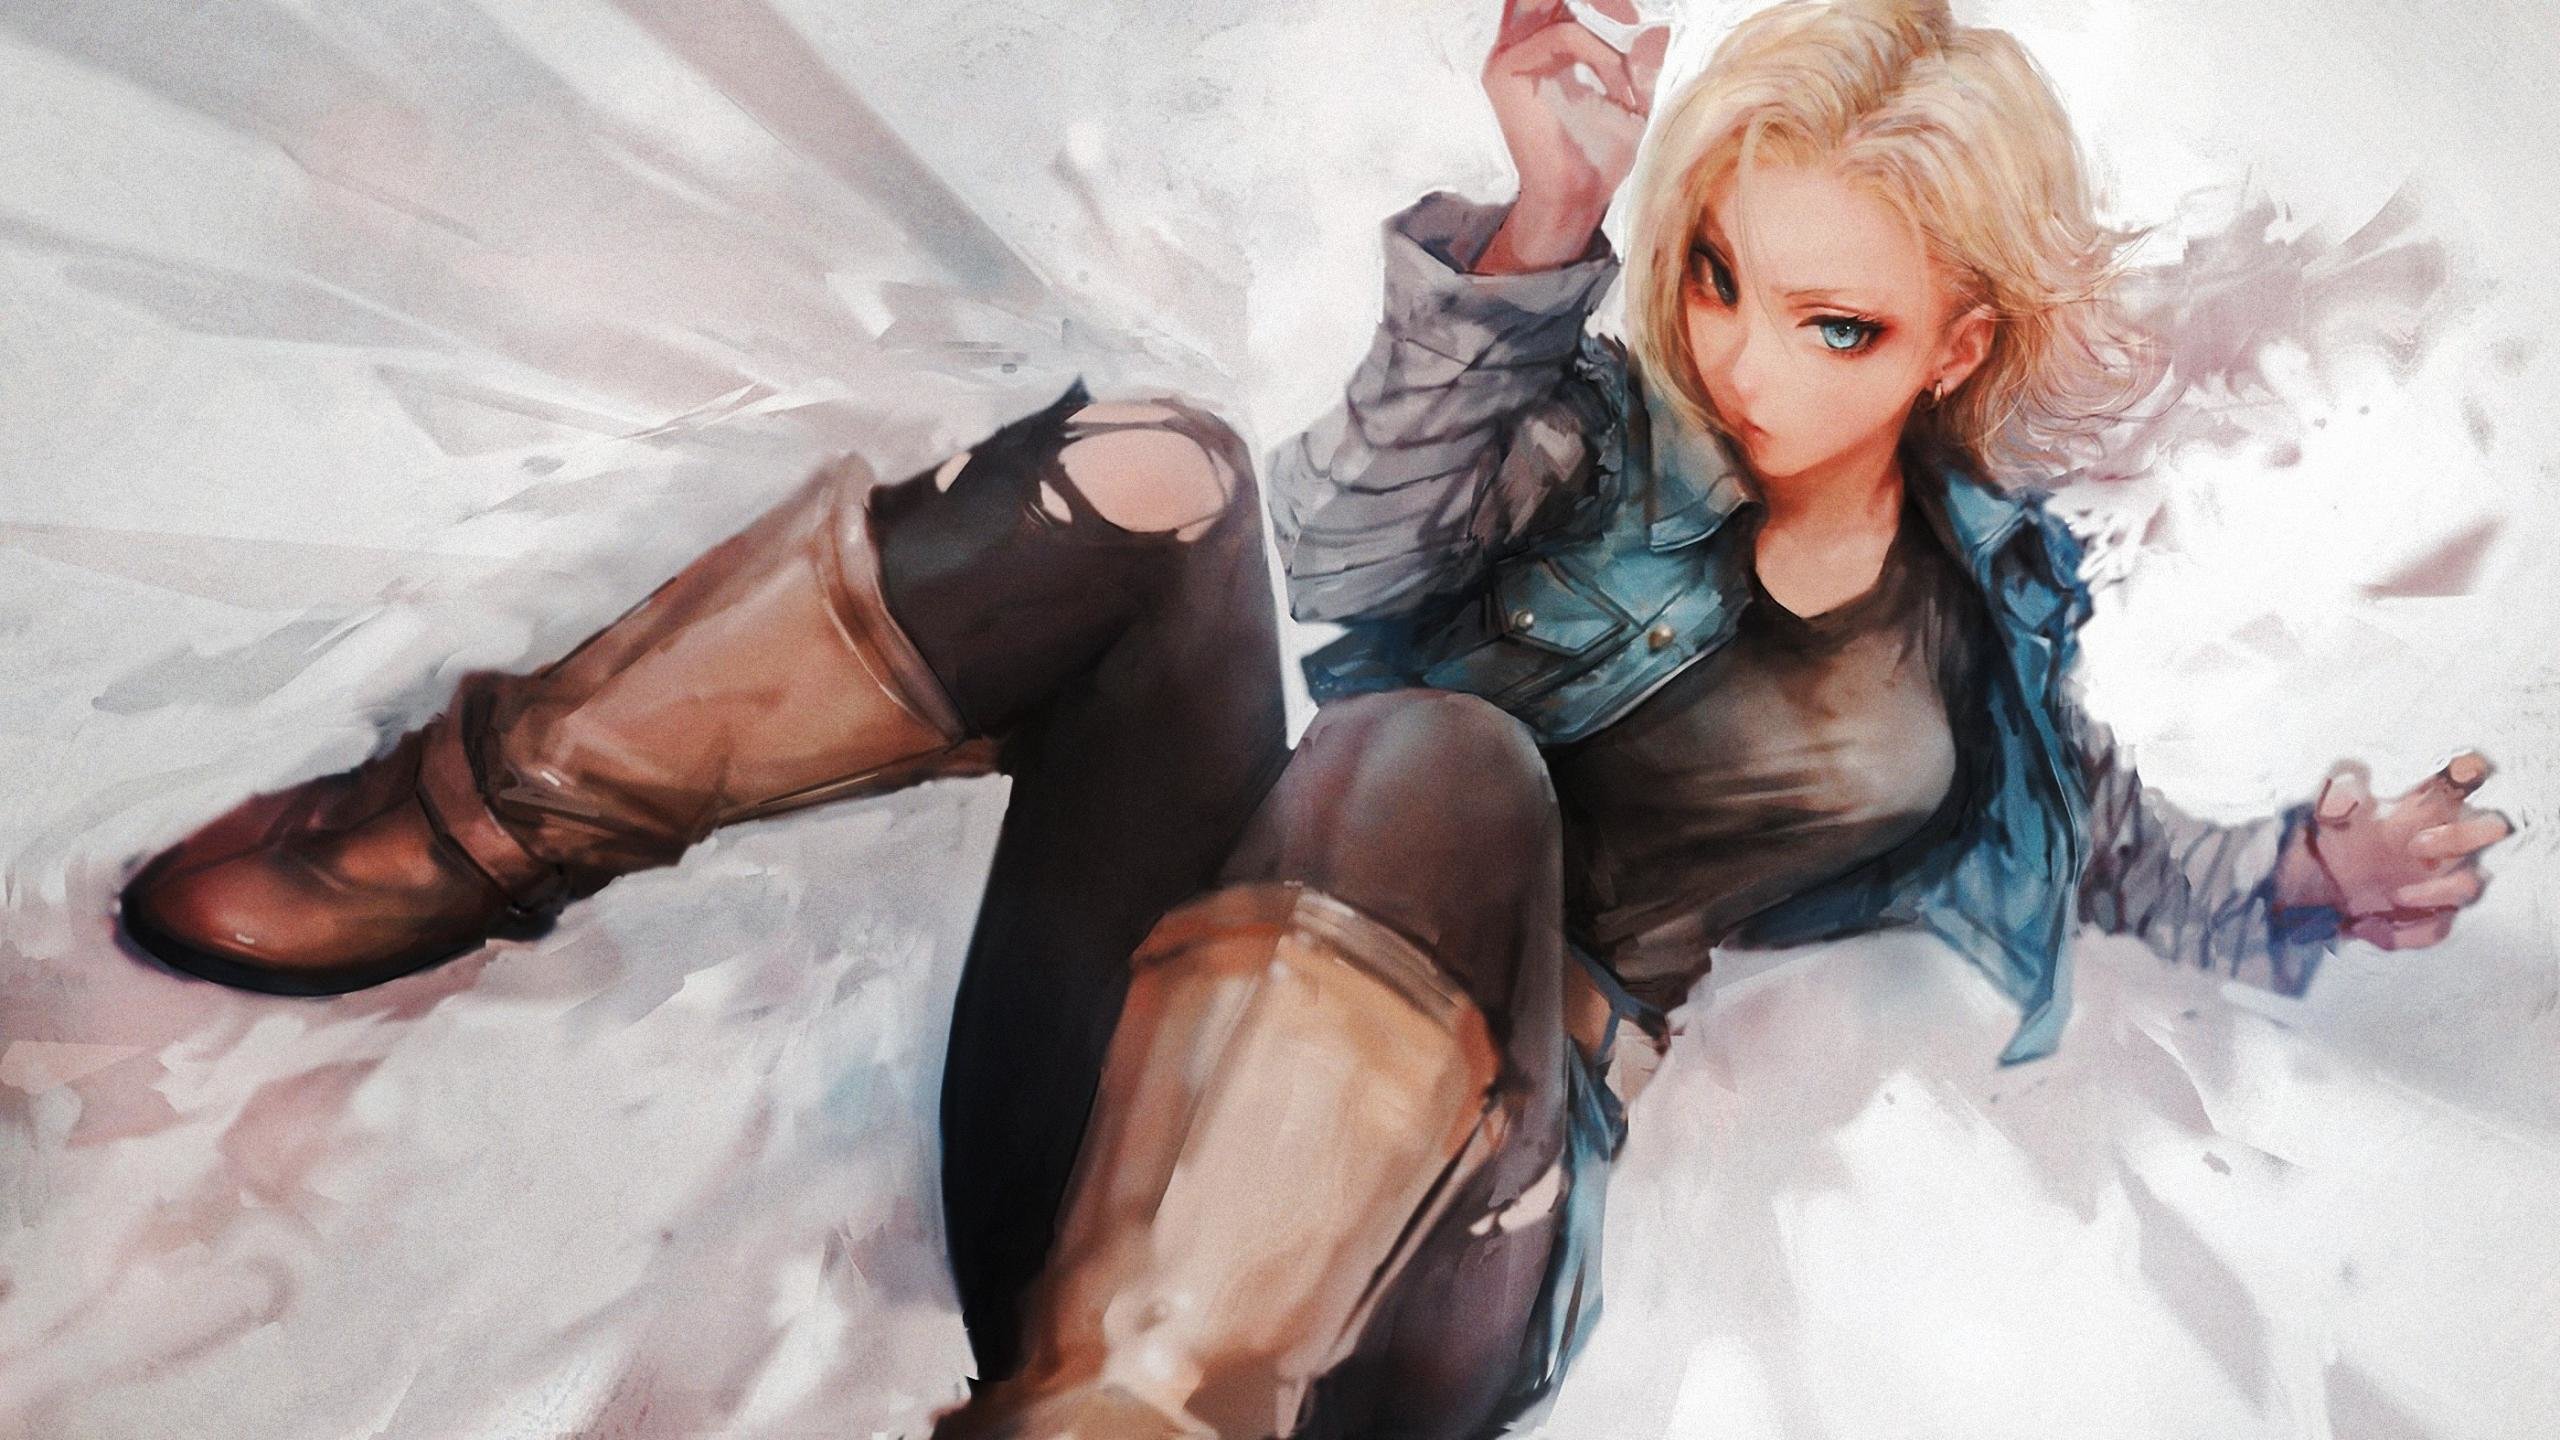 Awesome Android 18 Free Wallpaper Id - Android 18 - HD Wallpaper 